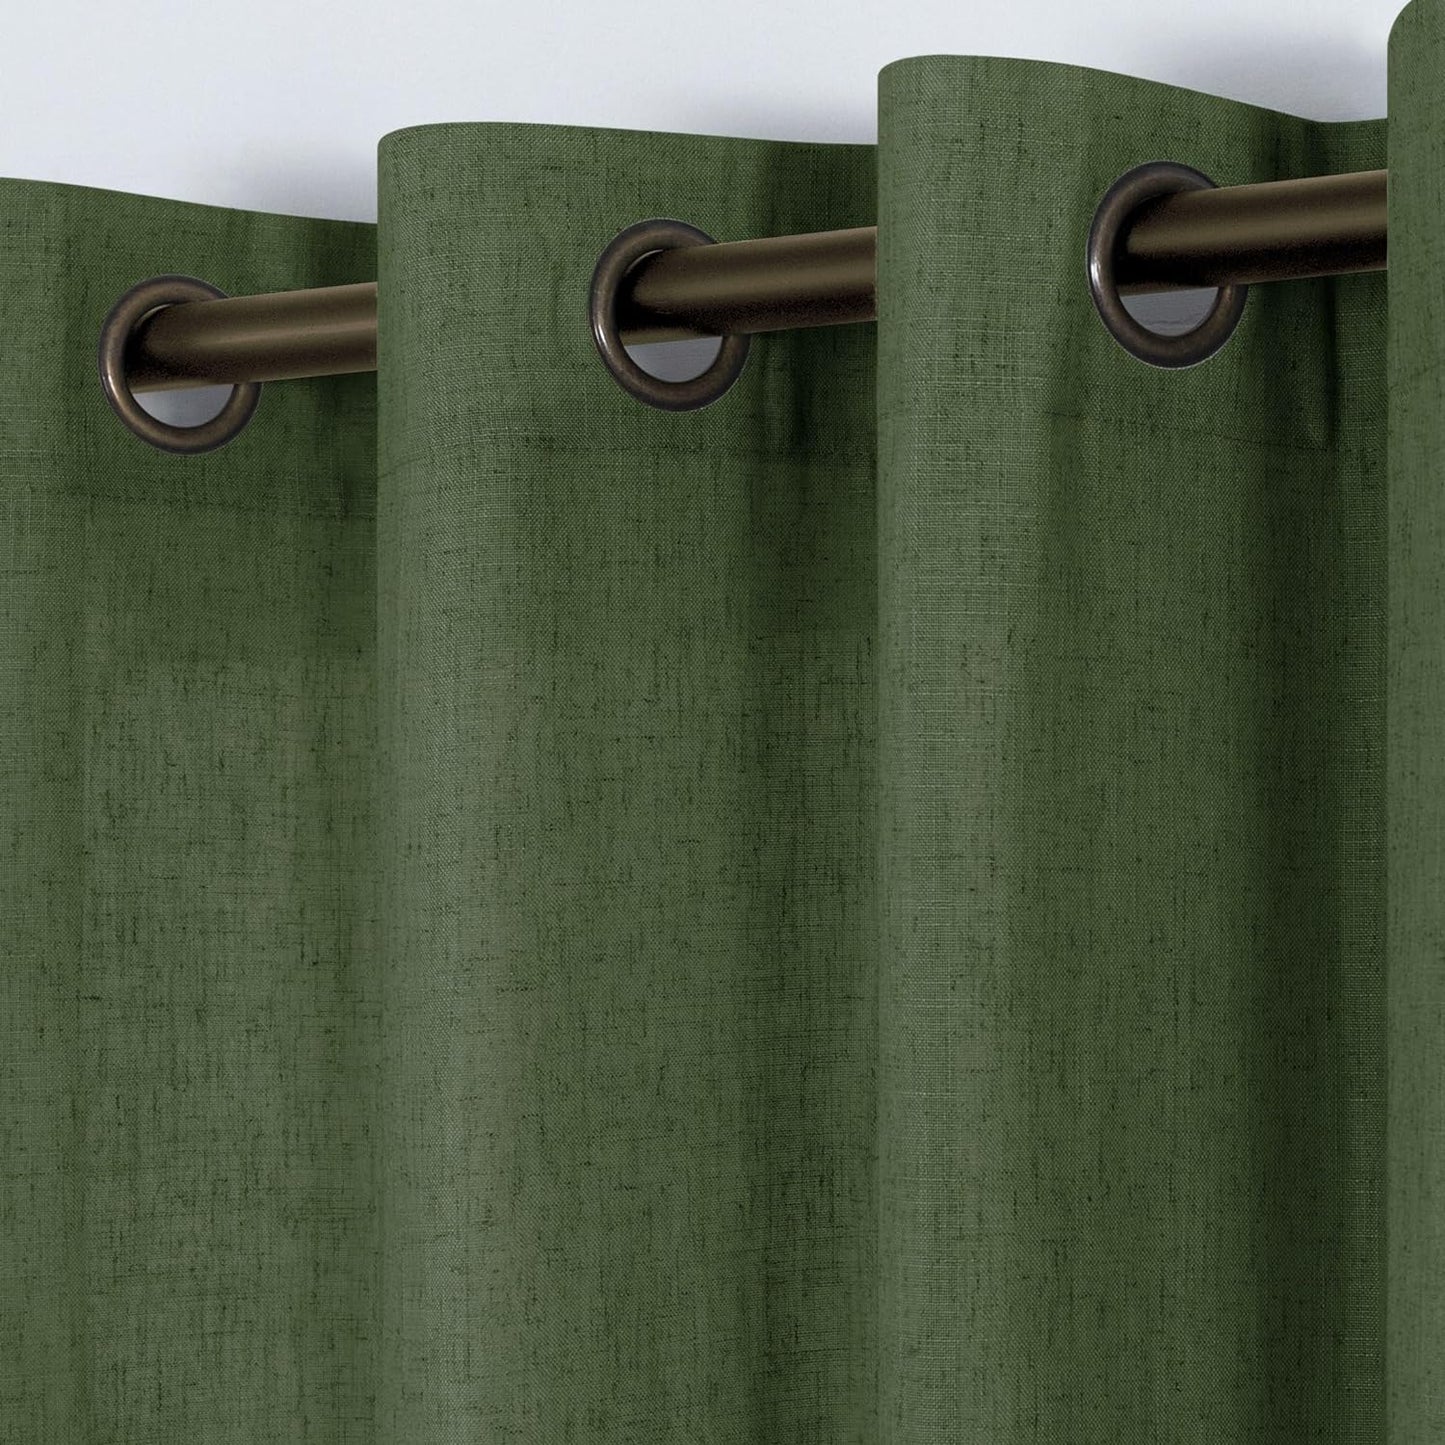 KOUFALL Beige Rustic Country Curtains for Living Room 84 Inches Long Flax Linen Bronze Grommet Tan Sand Color Solid Faux Linen Curtains for Bedroom Sliding Glass Patio Door 2 Panels  KOUFALL TEXTILE Olive Green 52X108 